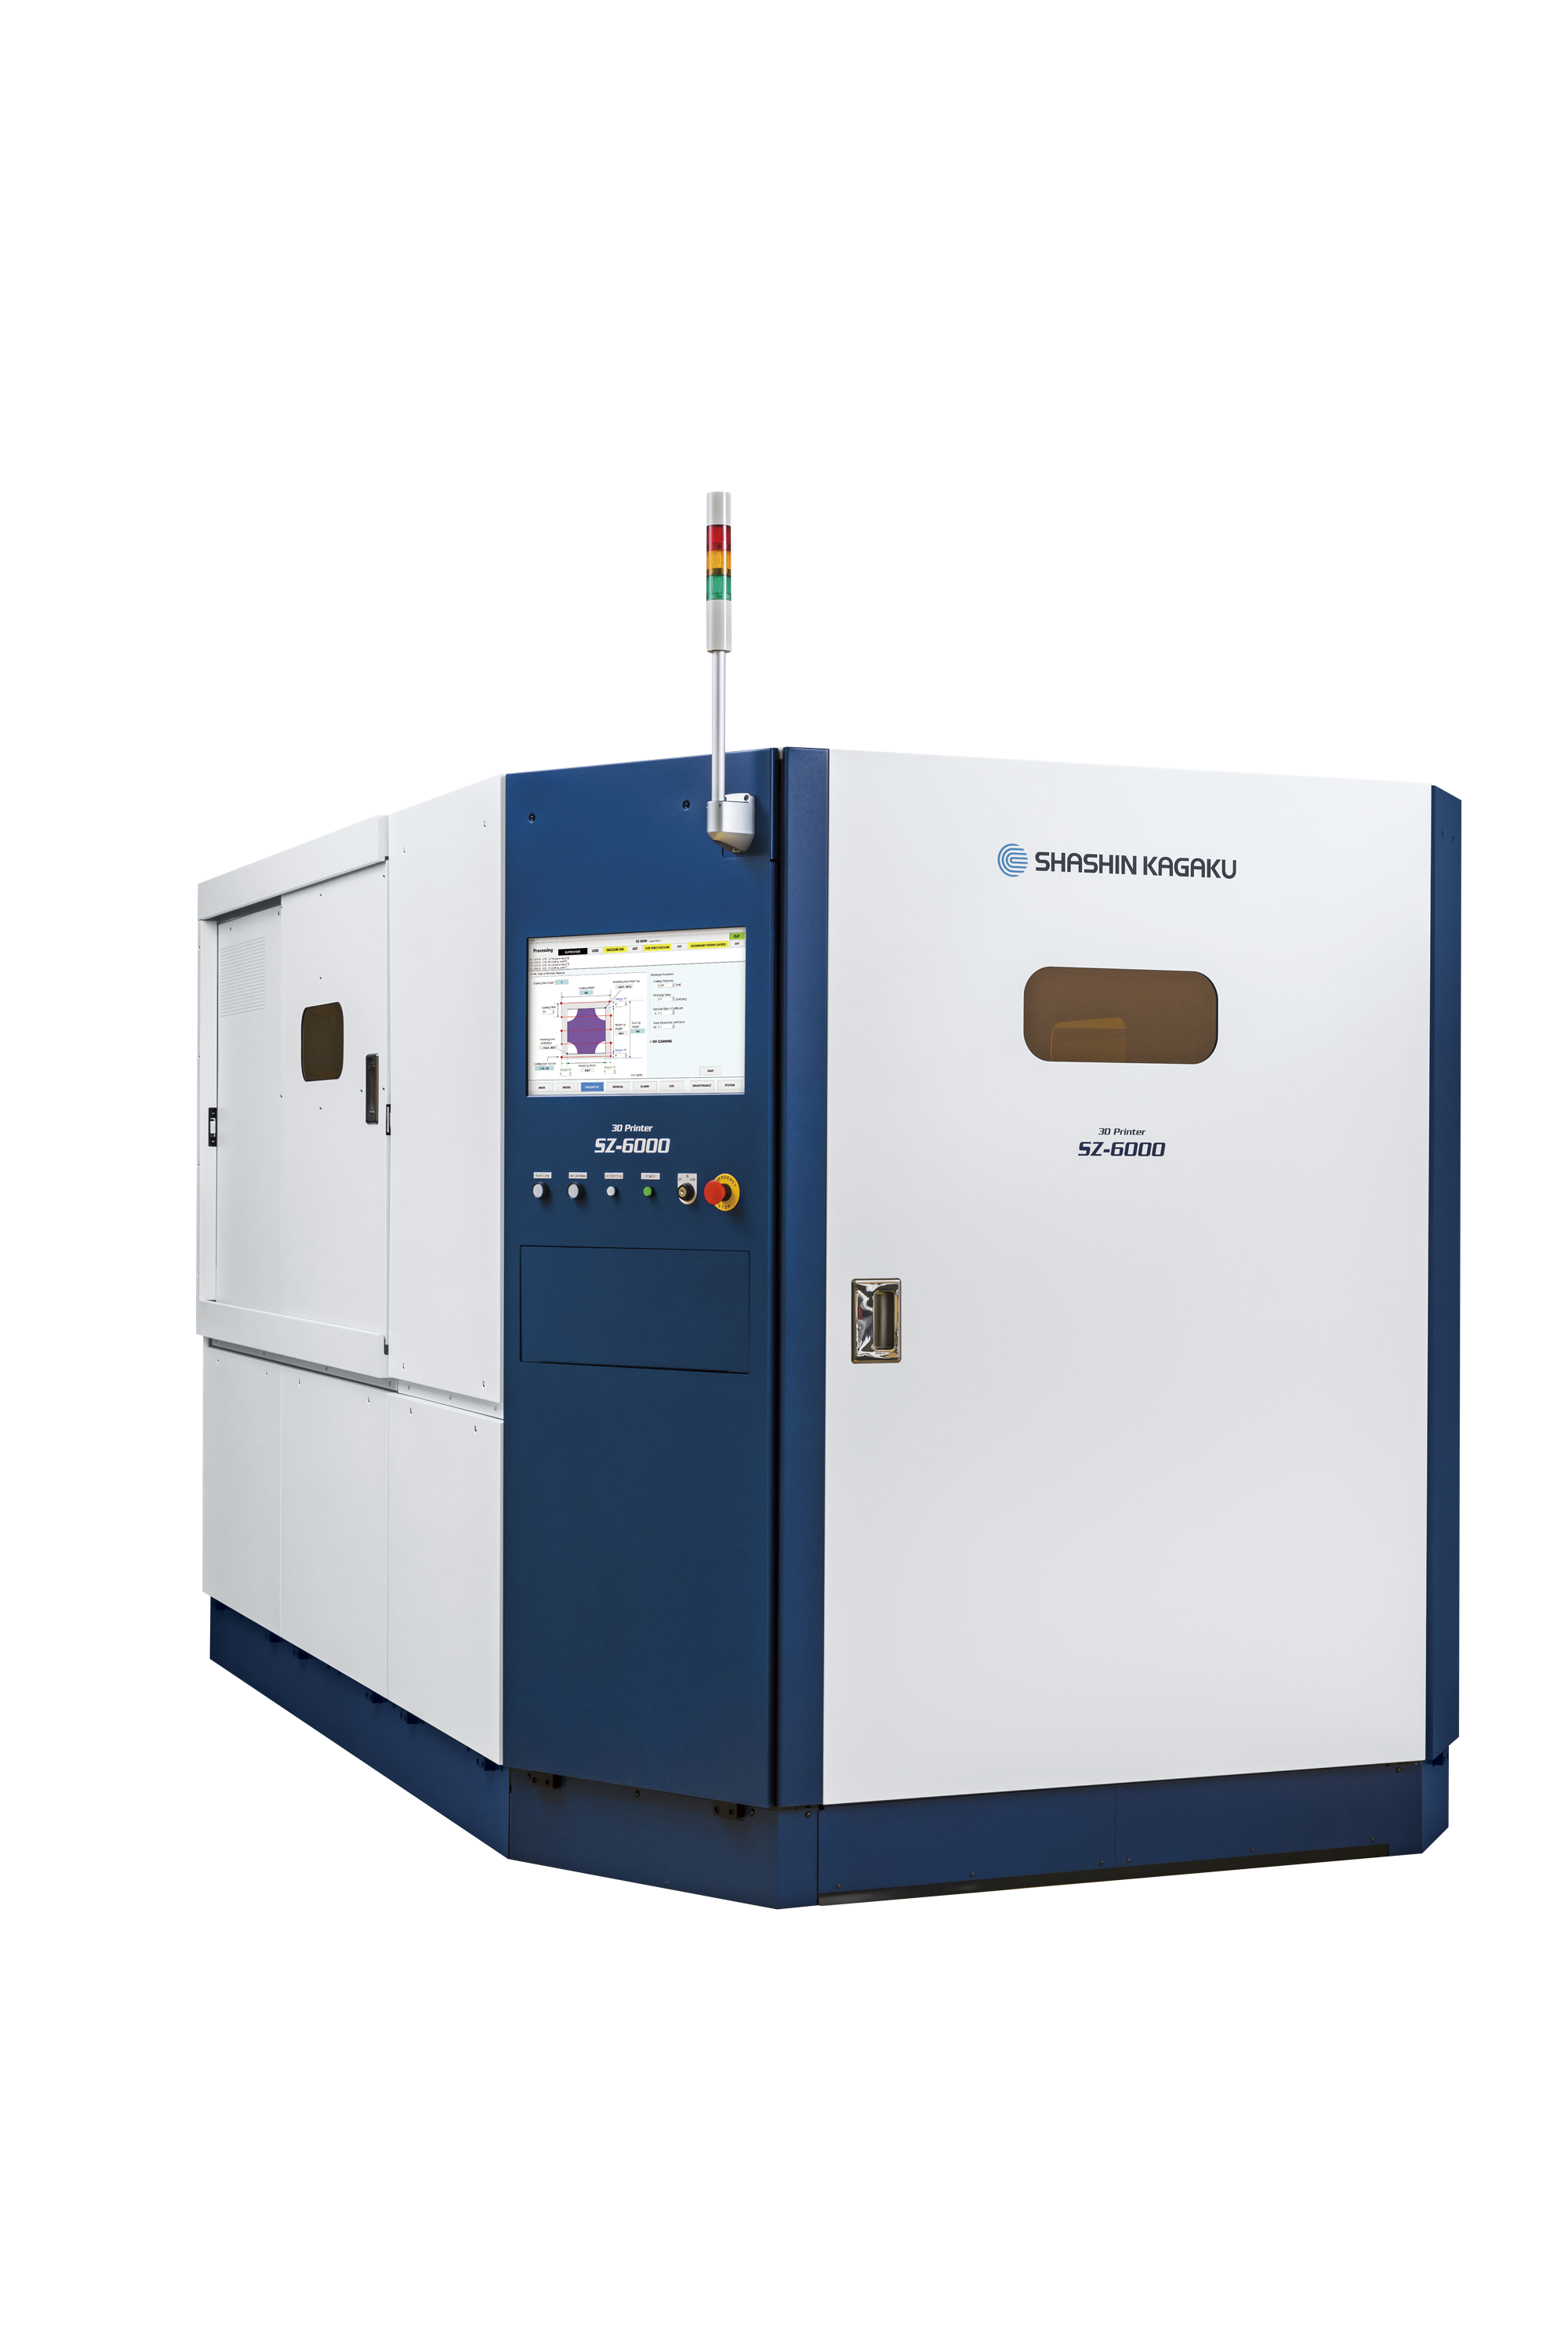 The new SZ-6000 is an extremely productive additive manufacturing (AM) machine that provided Shashin Kagaku a significant lead over its competition while offering customers a significant increase in productivity.